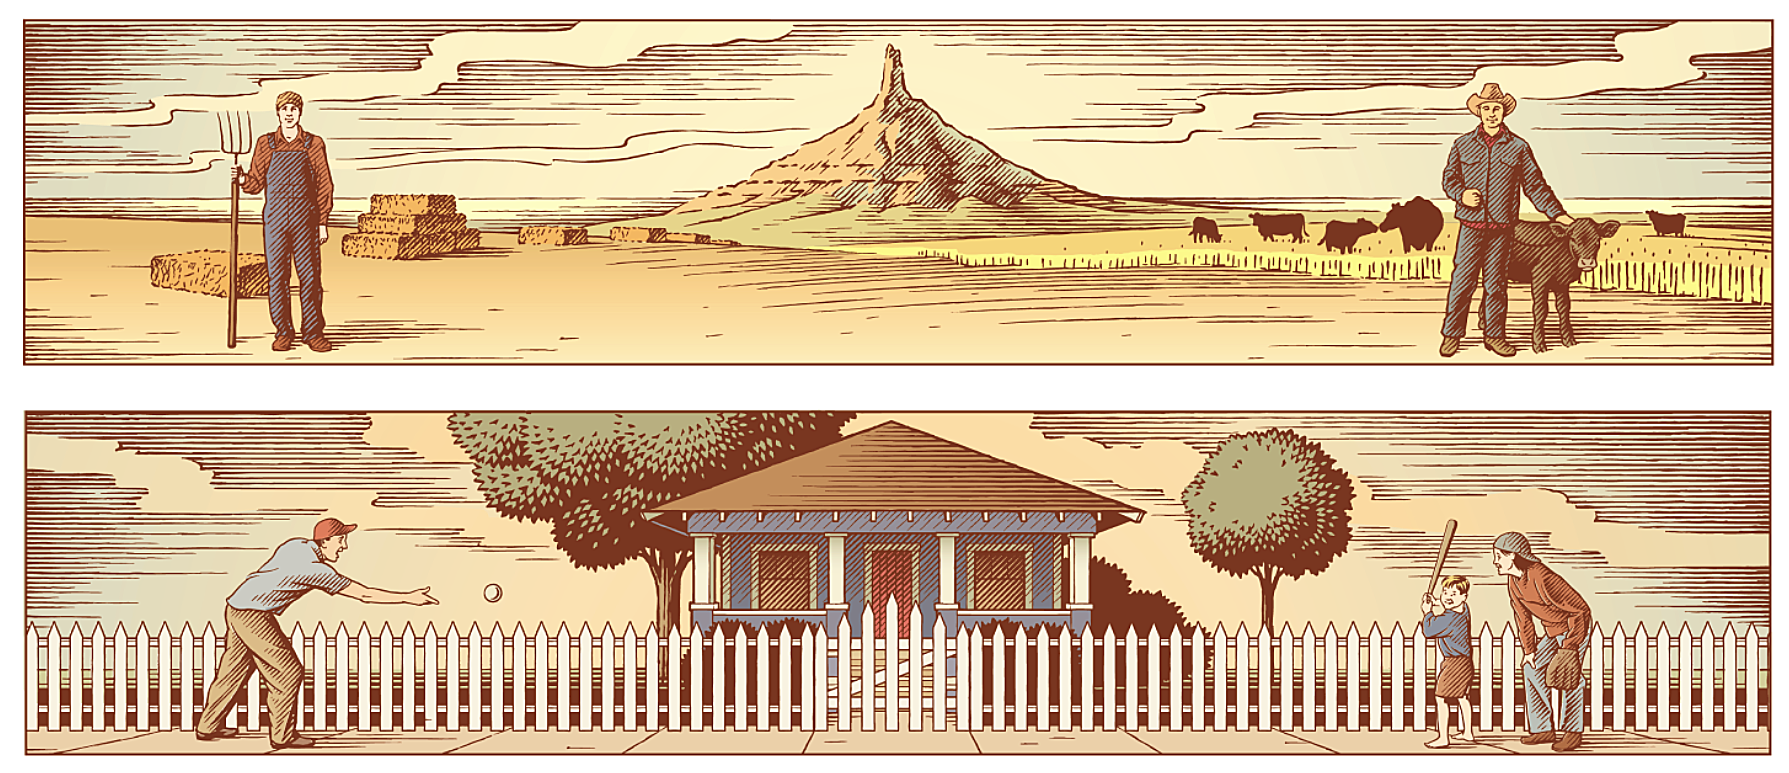 Engraving style banner illustrations of farmland and a family house